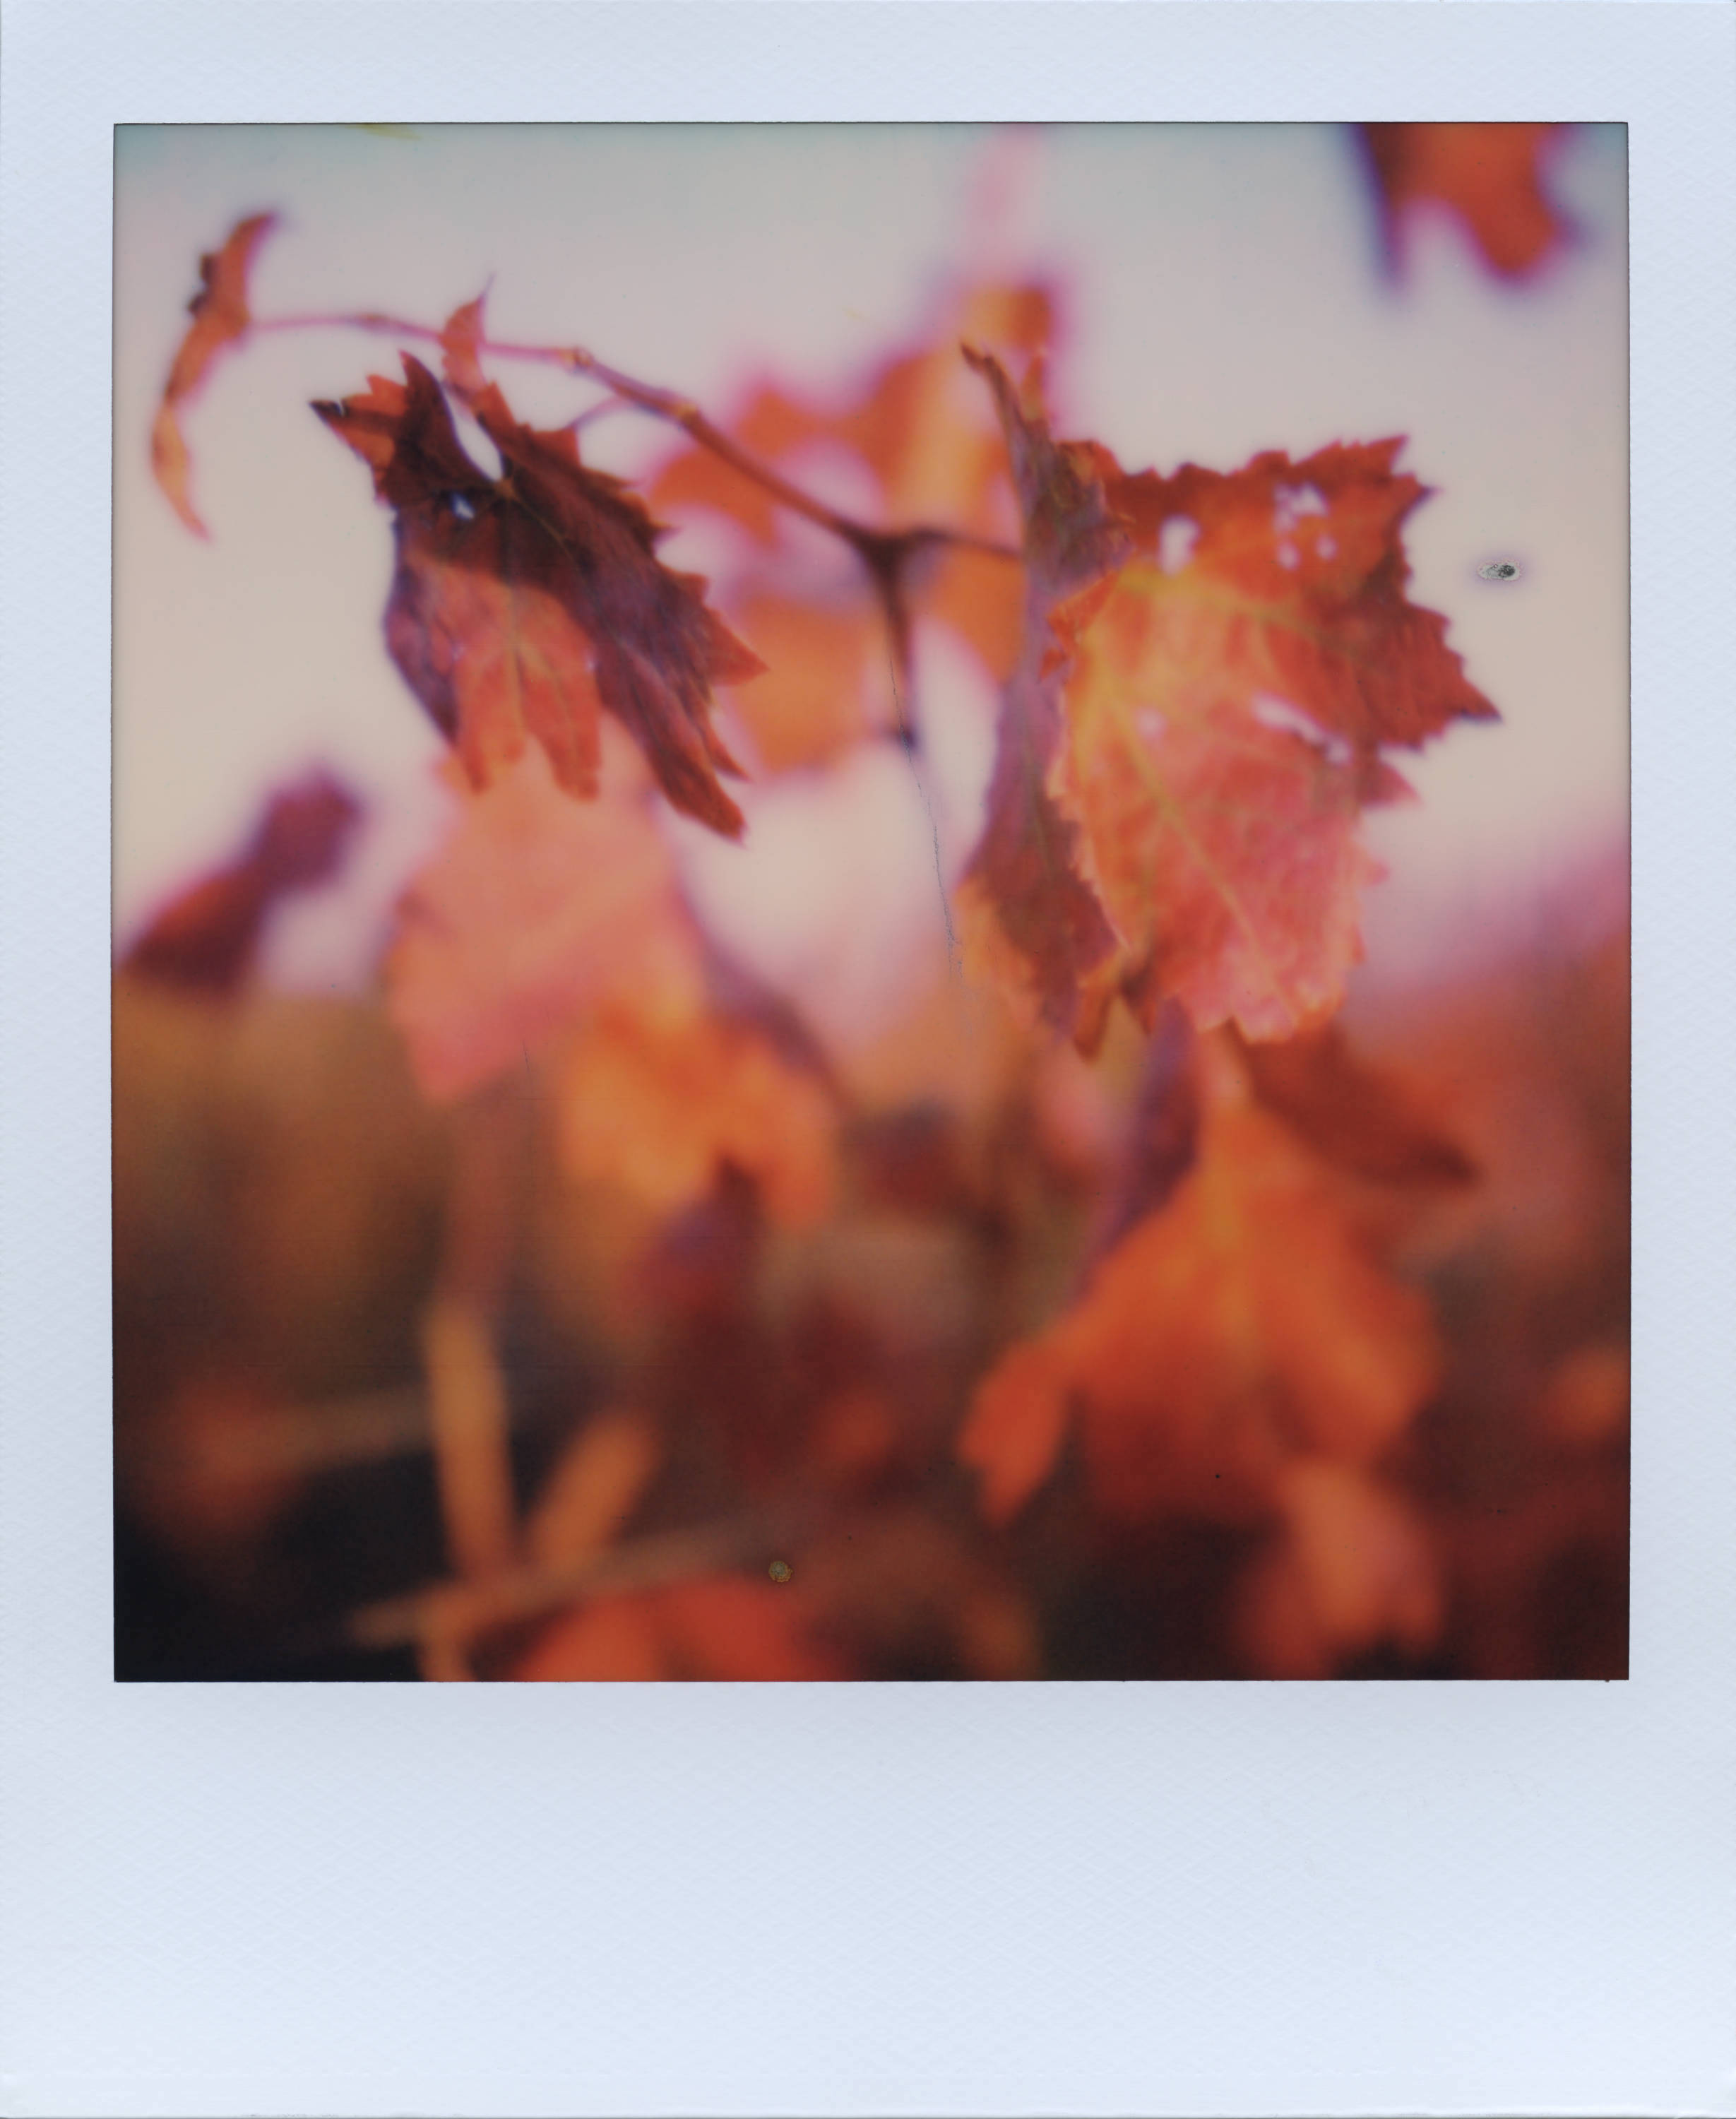 This Is Happening | SX-70 | POS SX-70  | Ale Di Gangi